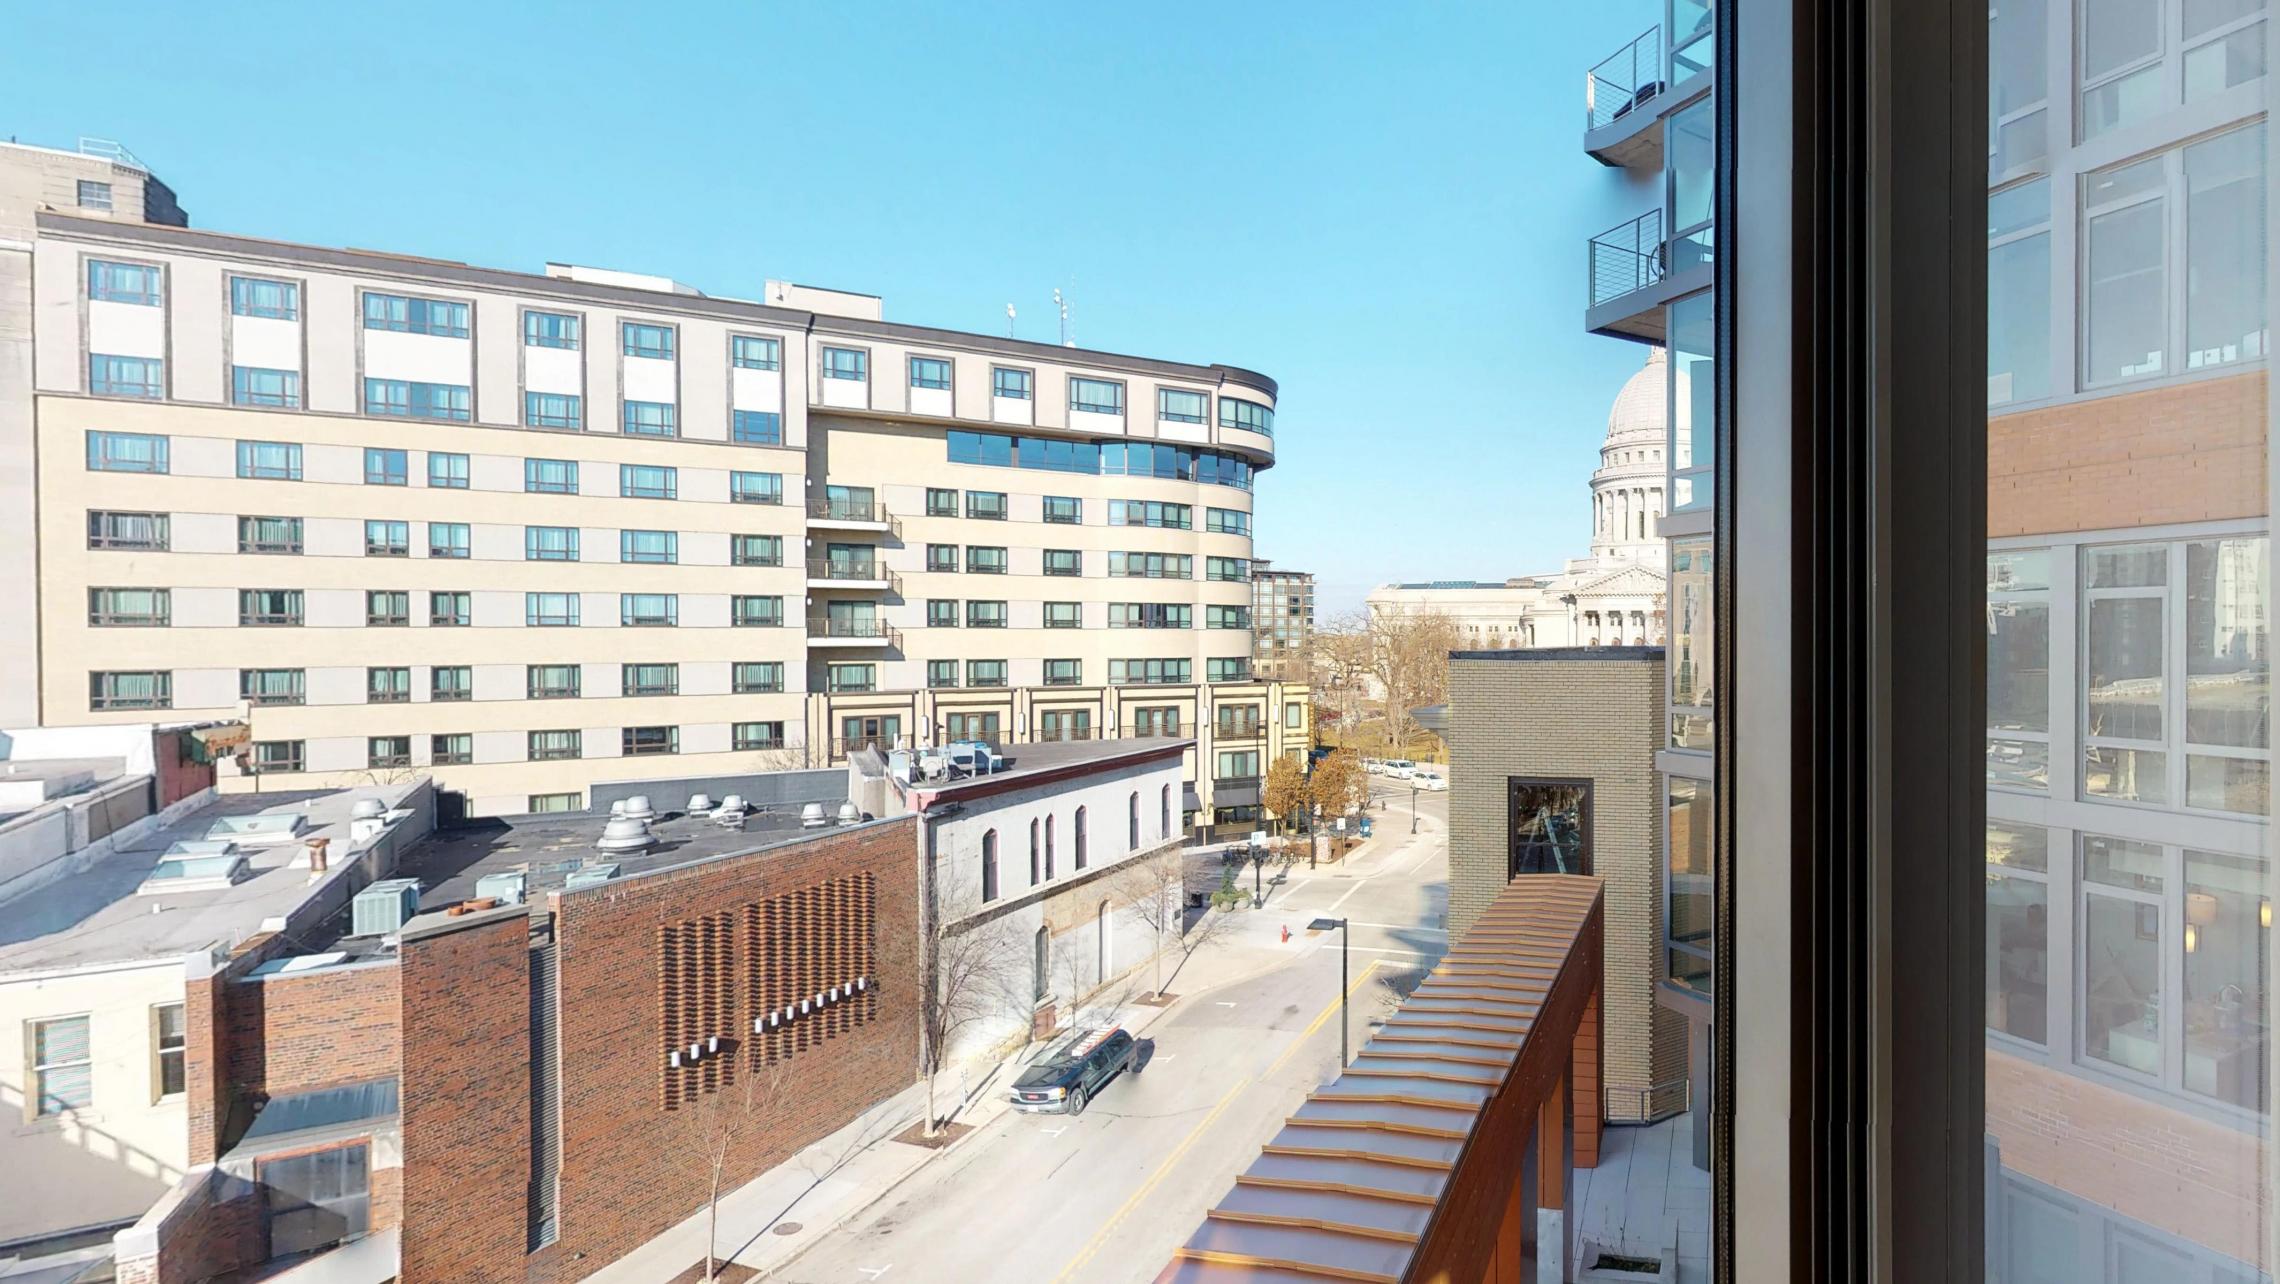 The-Pressman-Apartment-512-Two-Bedroom-Living-Room-View-Kitchen-Island-Downtown-Madison-Capitol-Balcony-Views.jpg